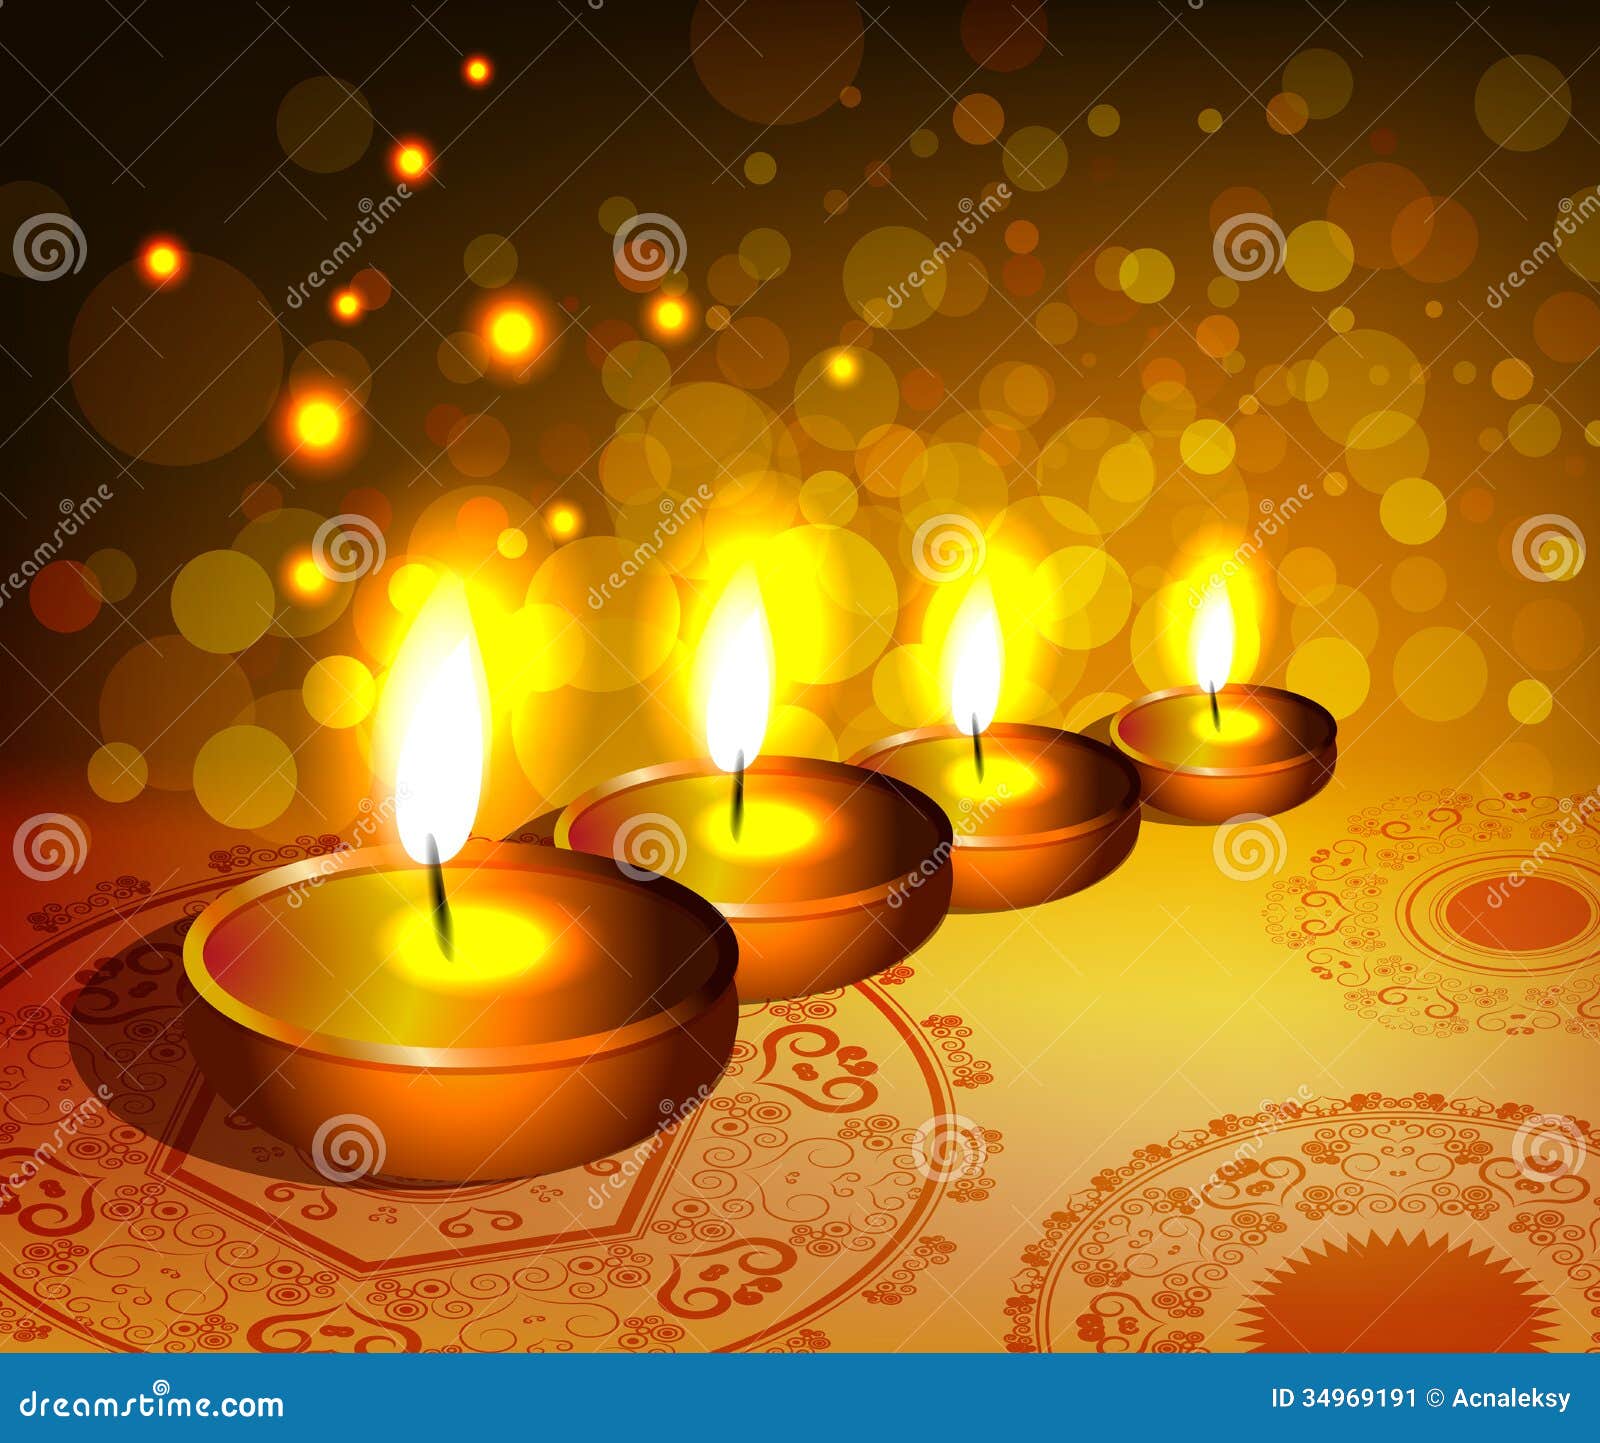 Religious Background For Diwali Festival With Lamp Stock Vector